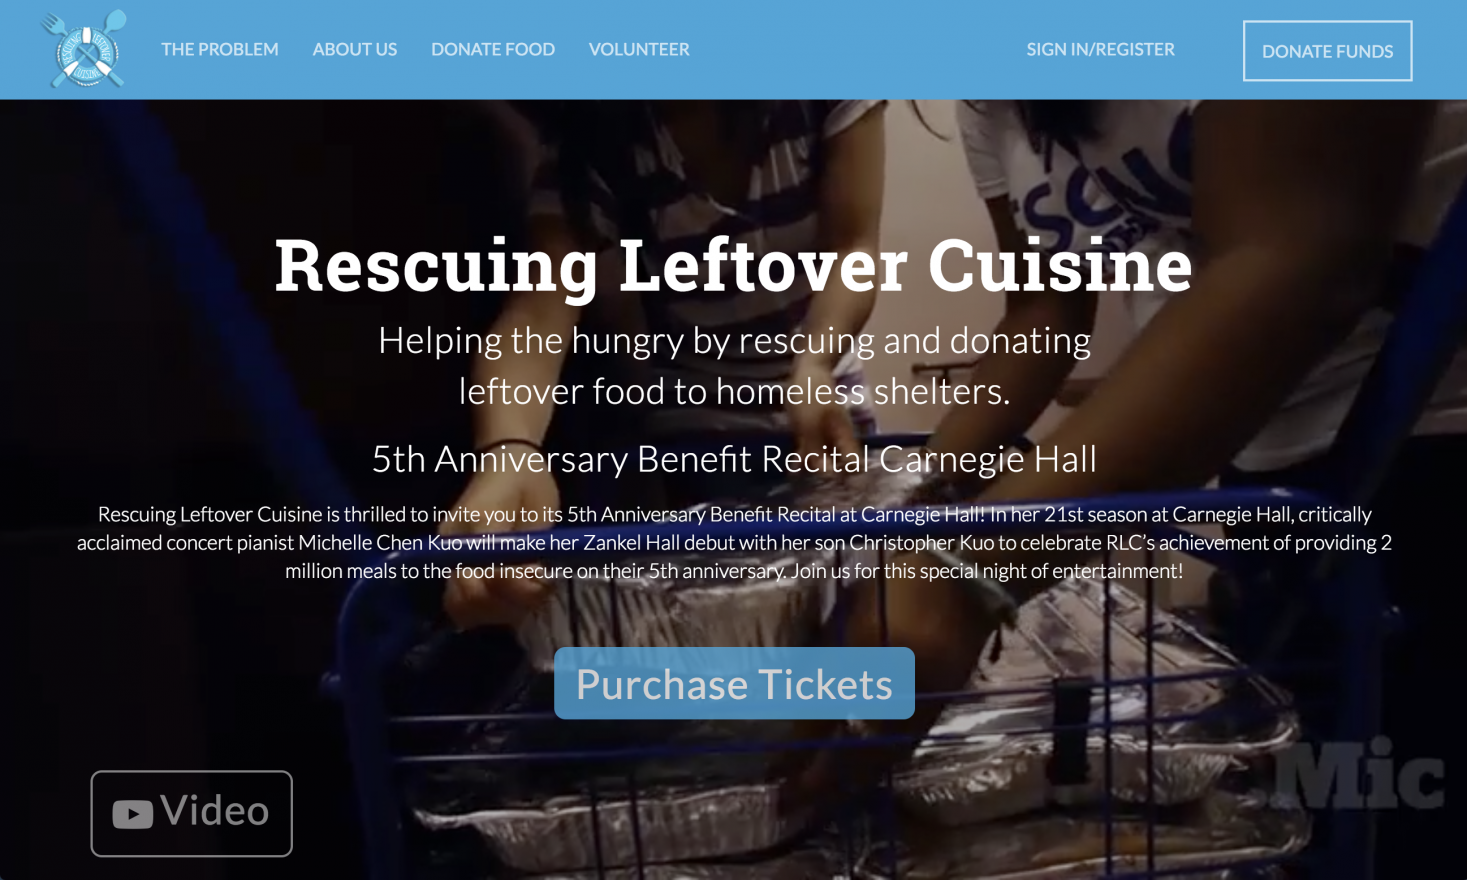 Rescue a leftover, save the planet